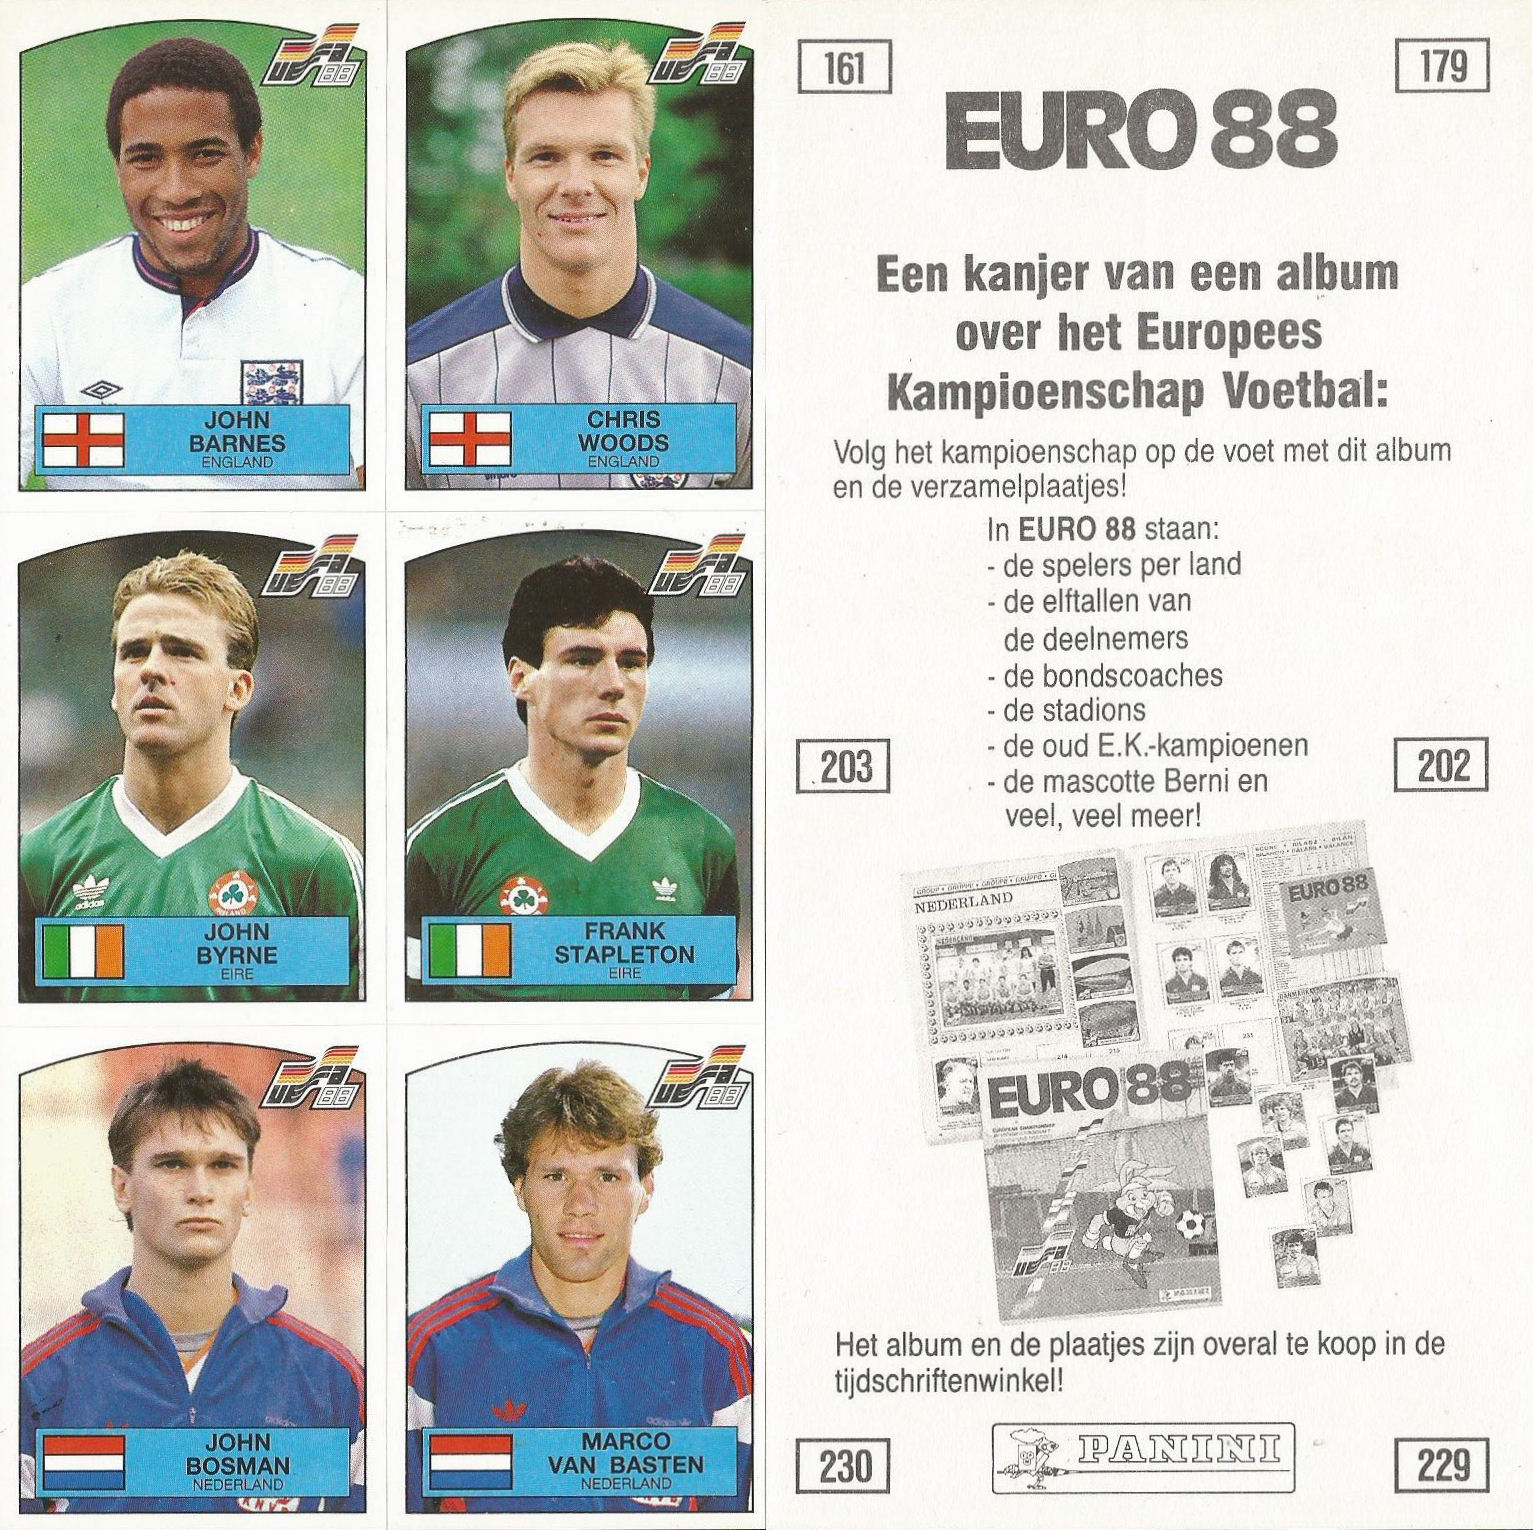 Panini EURO 88 N MINT CONDITION!!! 116 DENMARK JENSEN WITH BACK VERY GOOD 